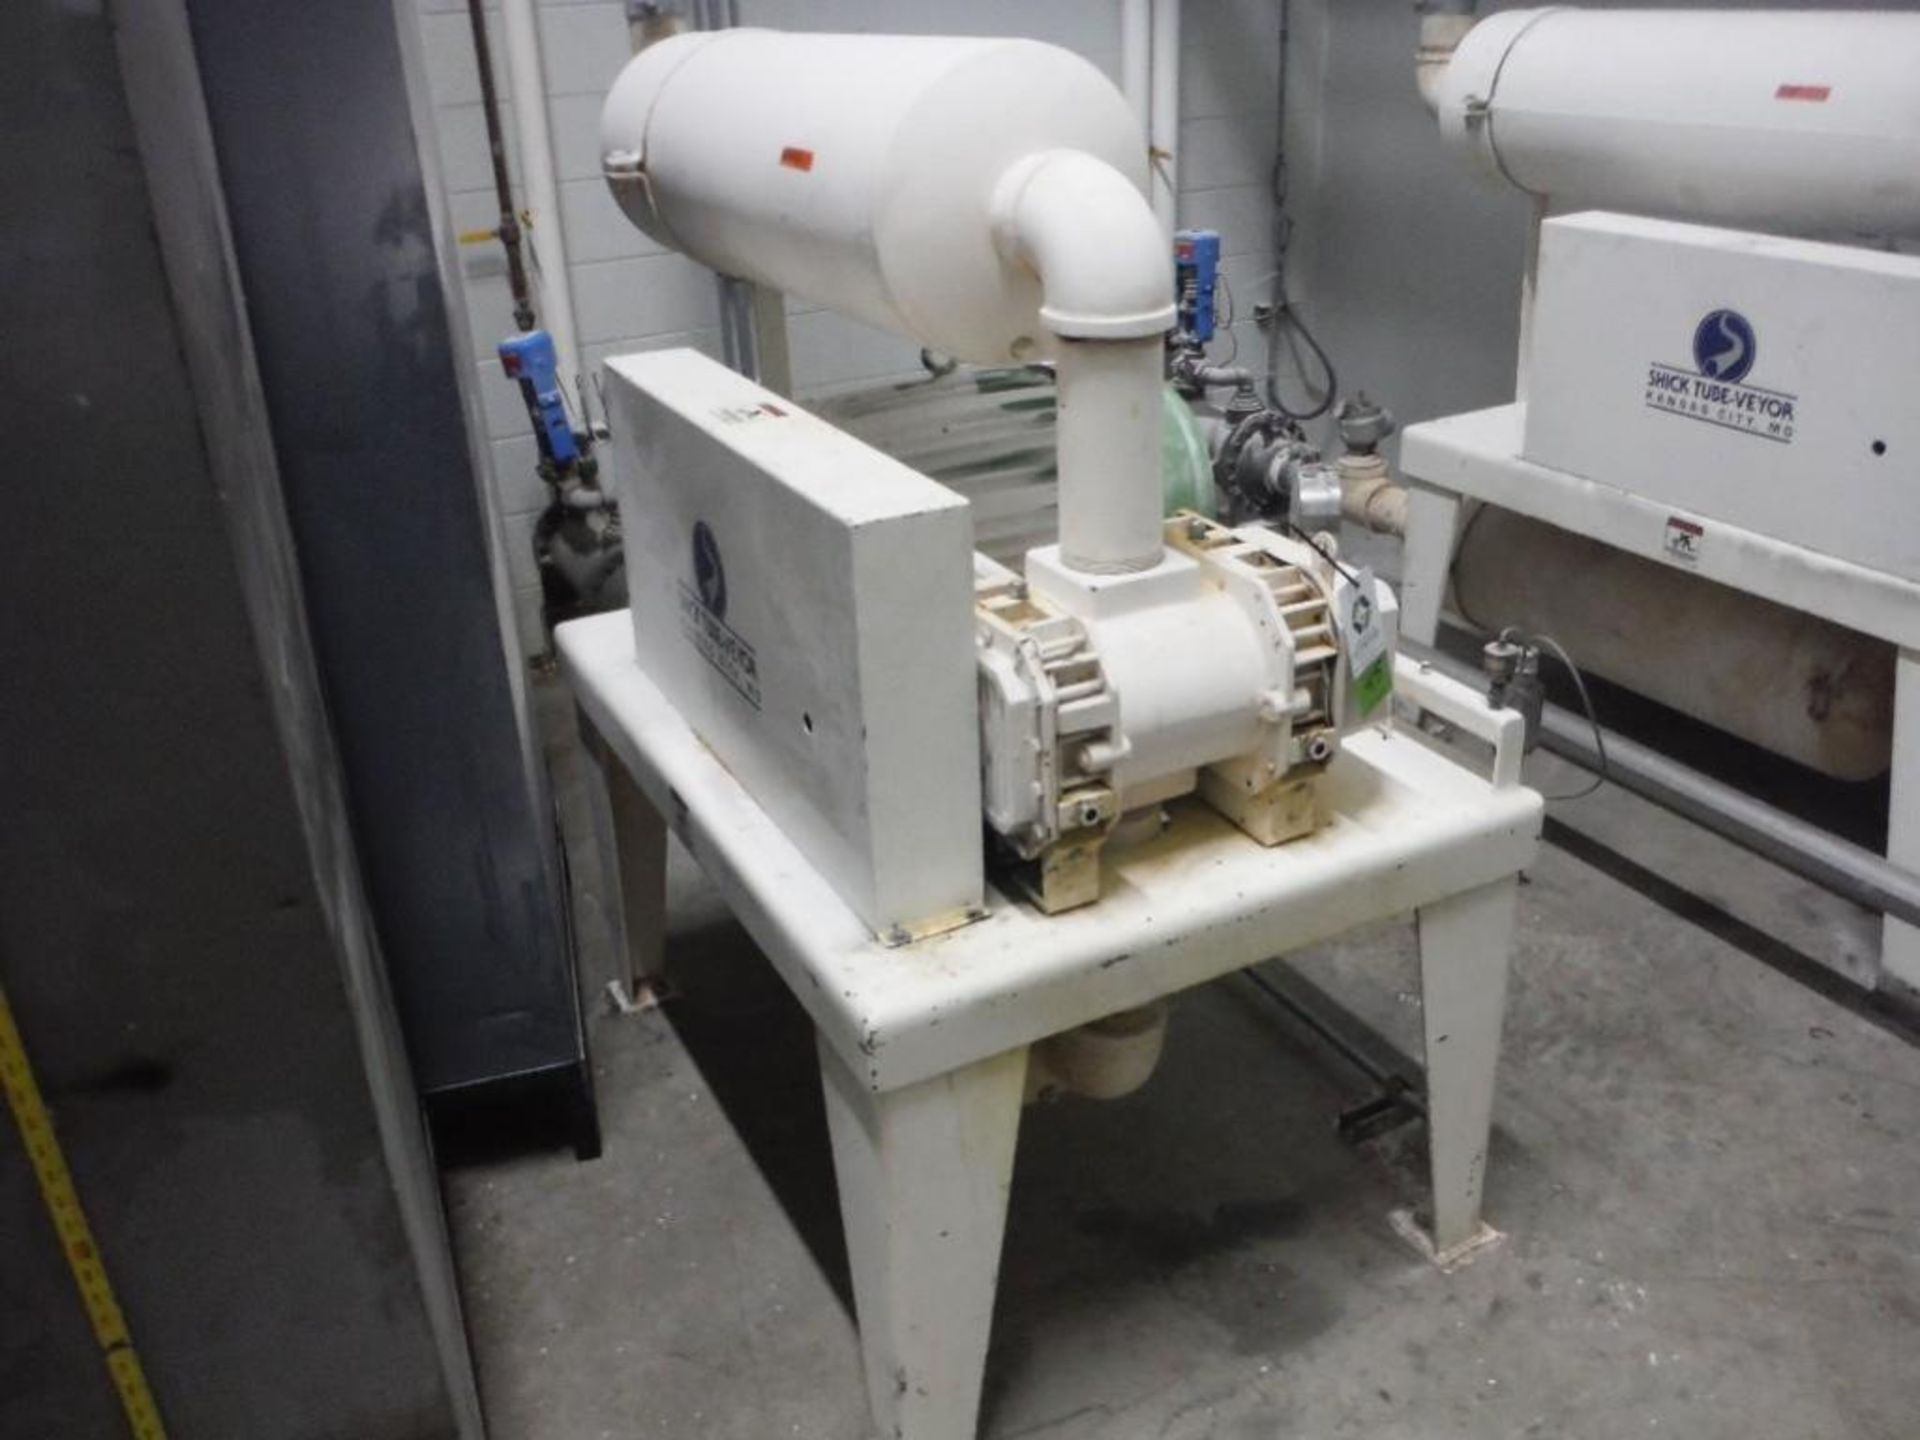 Shick rotary lobe blower, Model 93 F 47359, 50 hp - Rigging Fee: $300 - Image 2 of 7